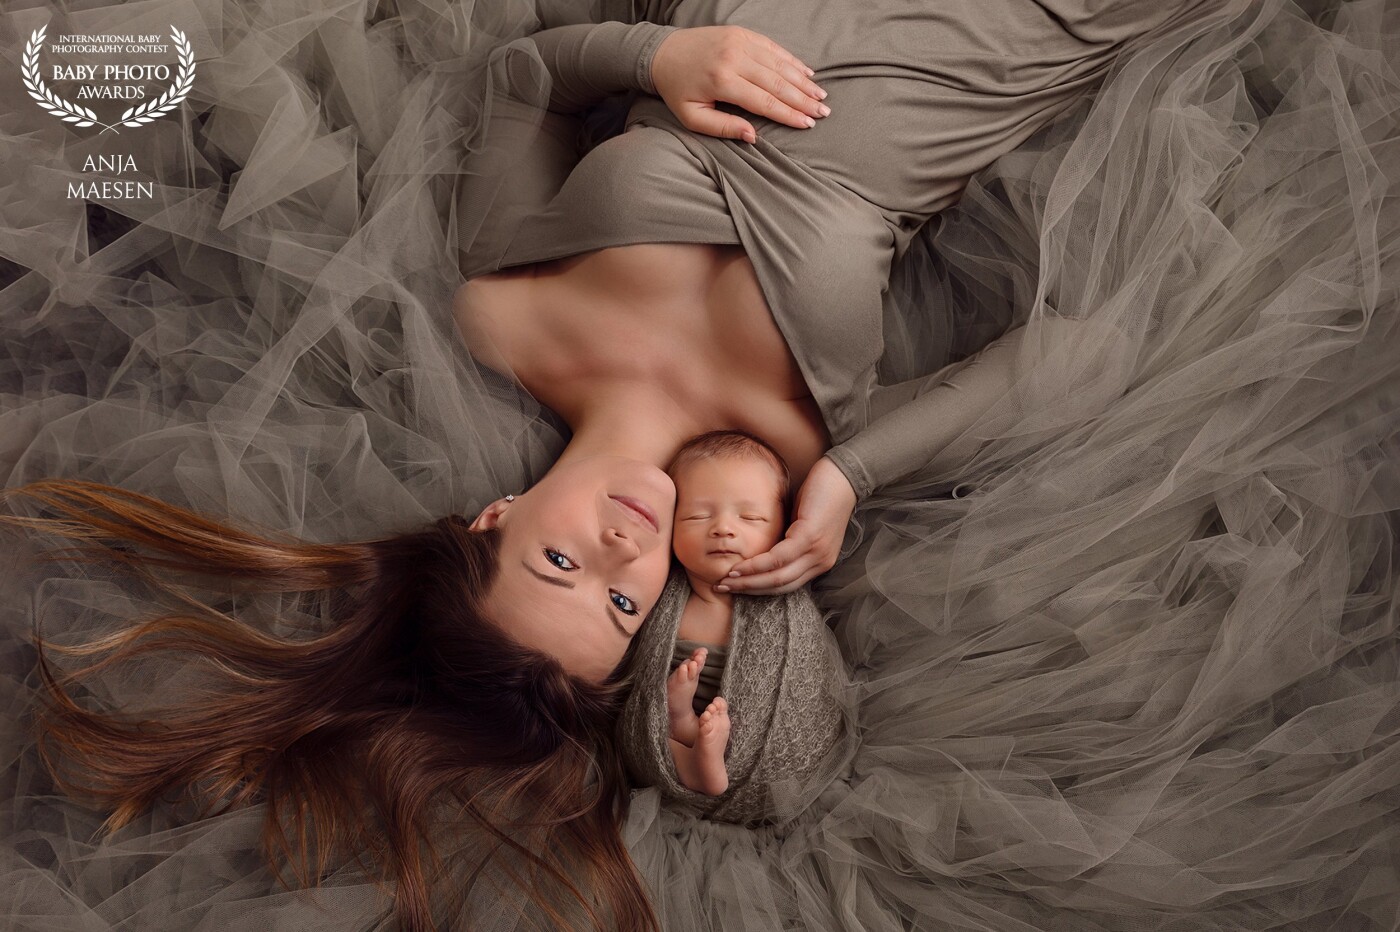 It was a pleasure working with this beautiful mama and her son Serkay,  11 days old. Simplicity in the picture brings out the beauty of these 2.